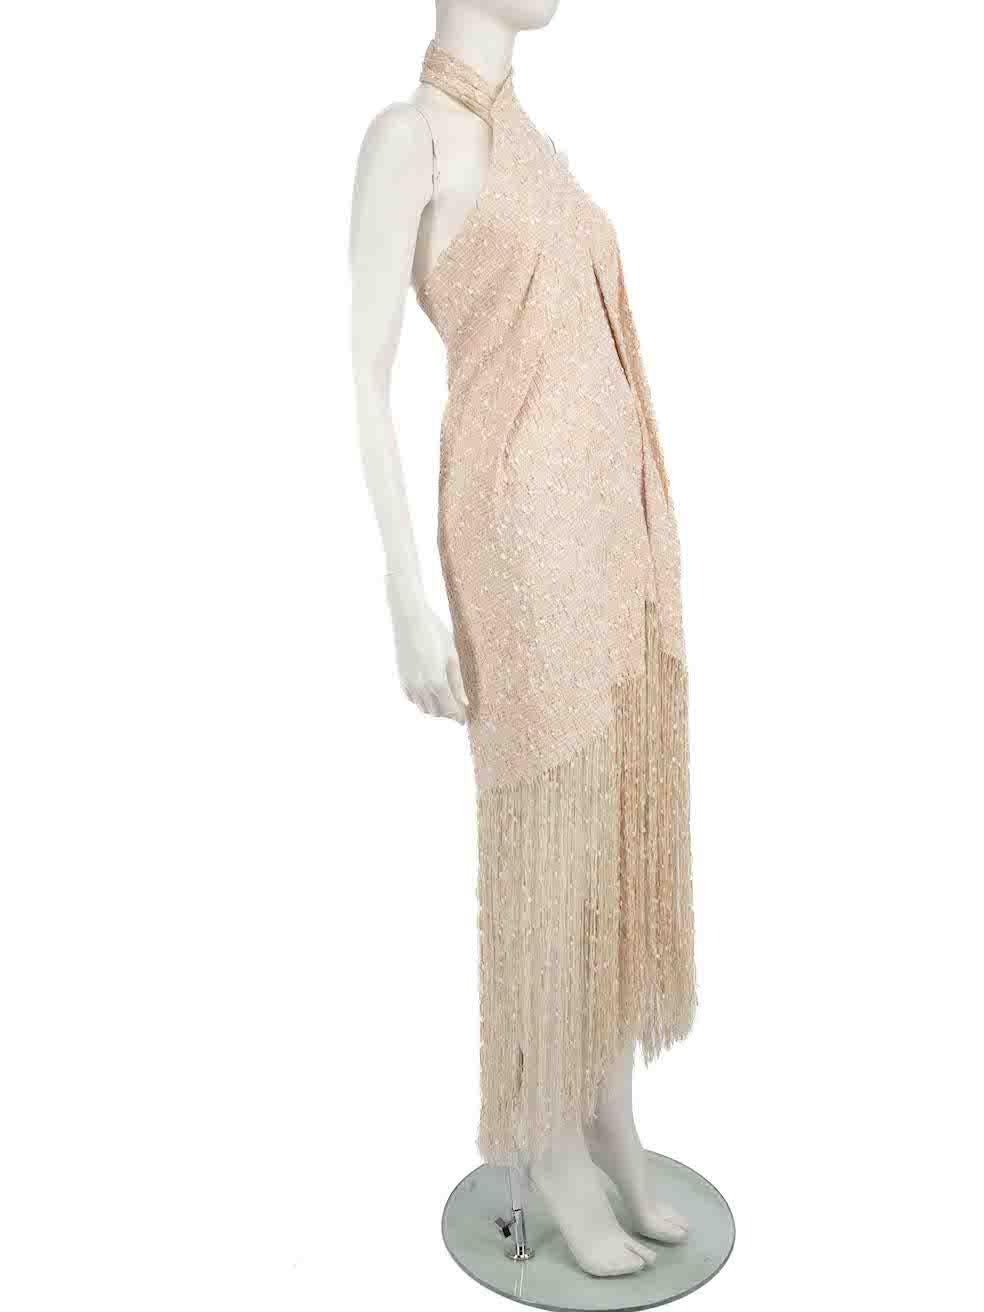 CONDITION is Very good. Hardly any visible wear to dress is evident on this used Jacquemus designer resale item.
 
 Details
 La Riviera collection
 Valoria model
 Beige
 Tweed
 Midi dress
 Halterneck
 Fringed tassel detail on hemline
 Open back
